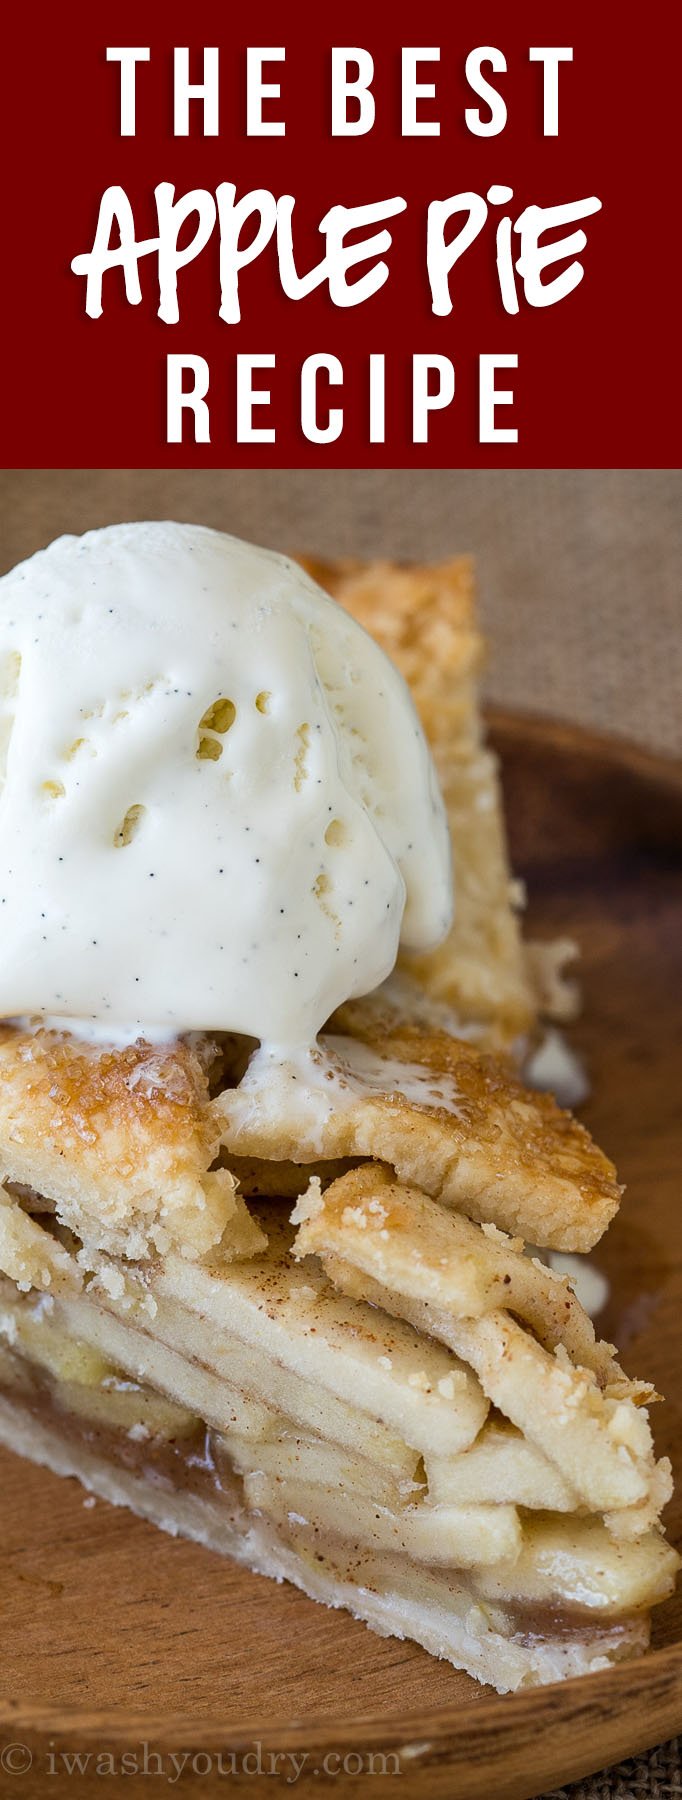 This is the easiest Homemade Apple Pie Recipe! My whole family LOVED it!